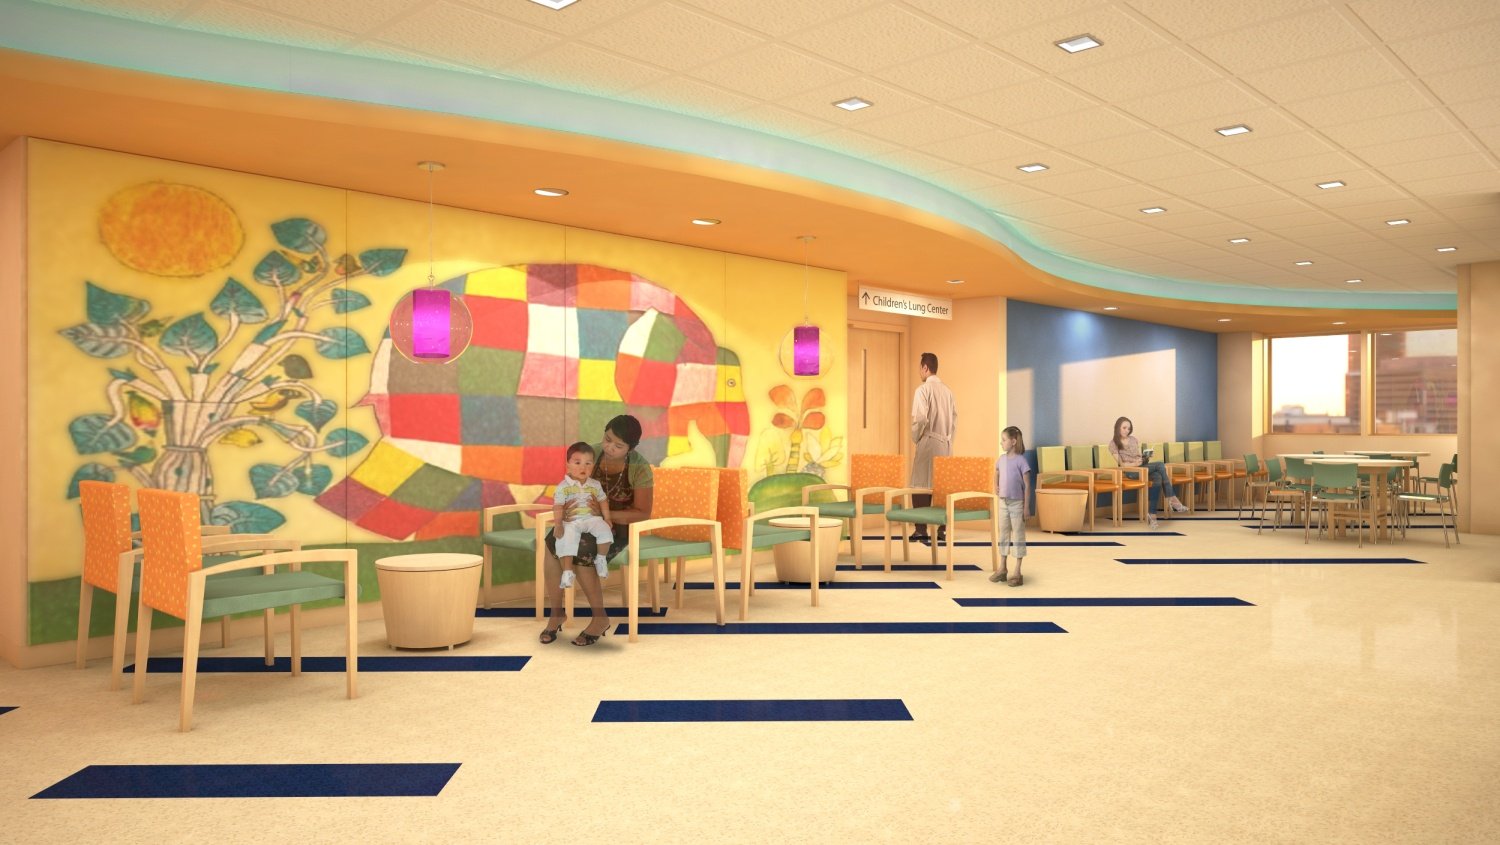 Creative themes in pediatric hospitals to promote curiousity